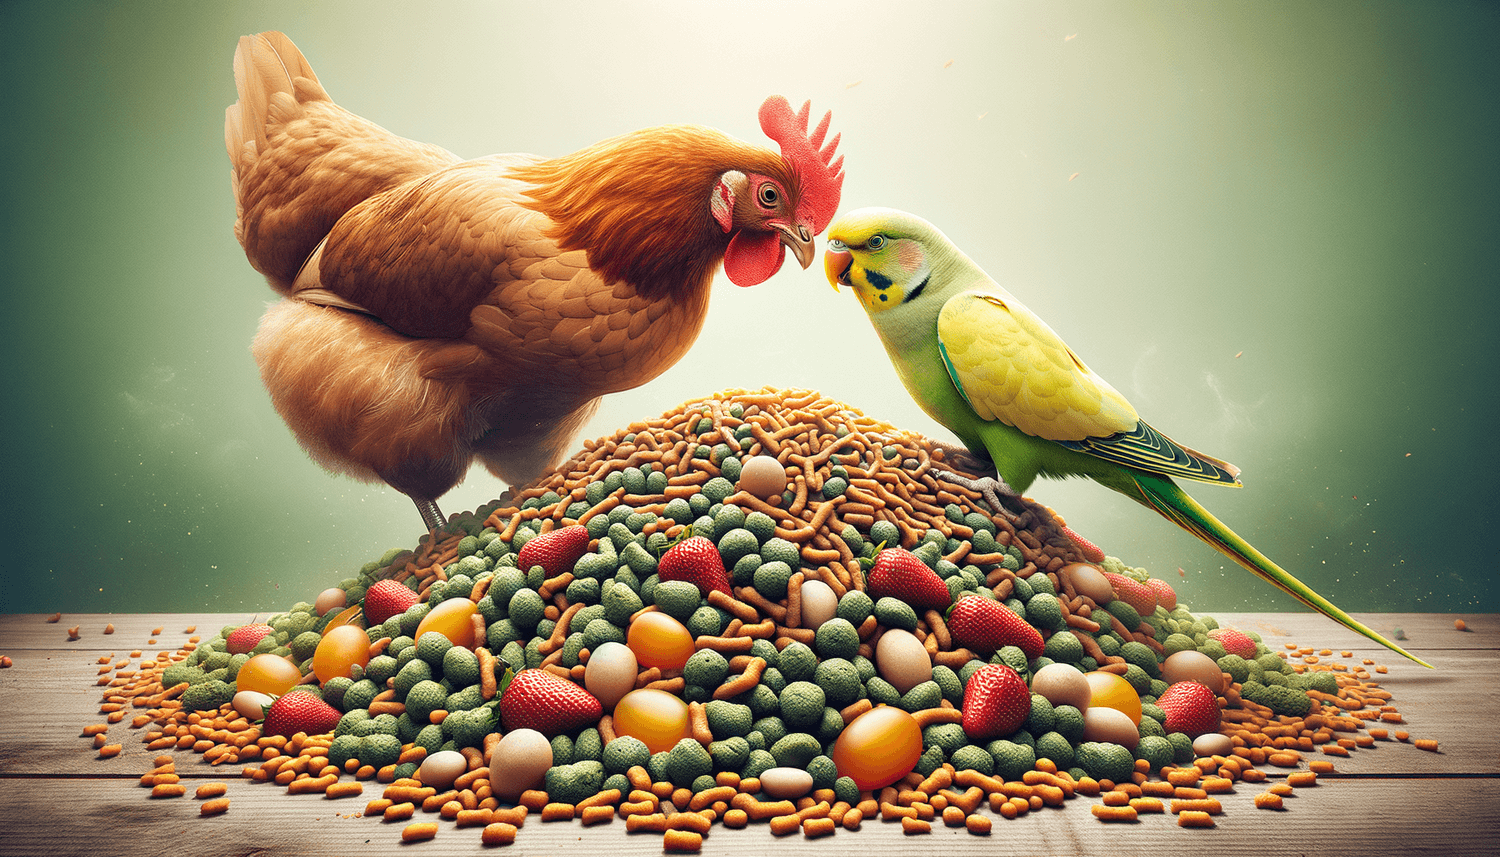 Can Chickens Eat Parakeet Food?